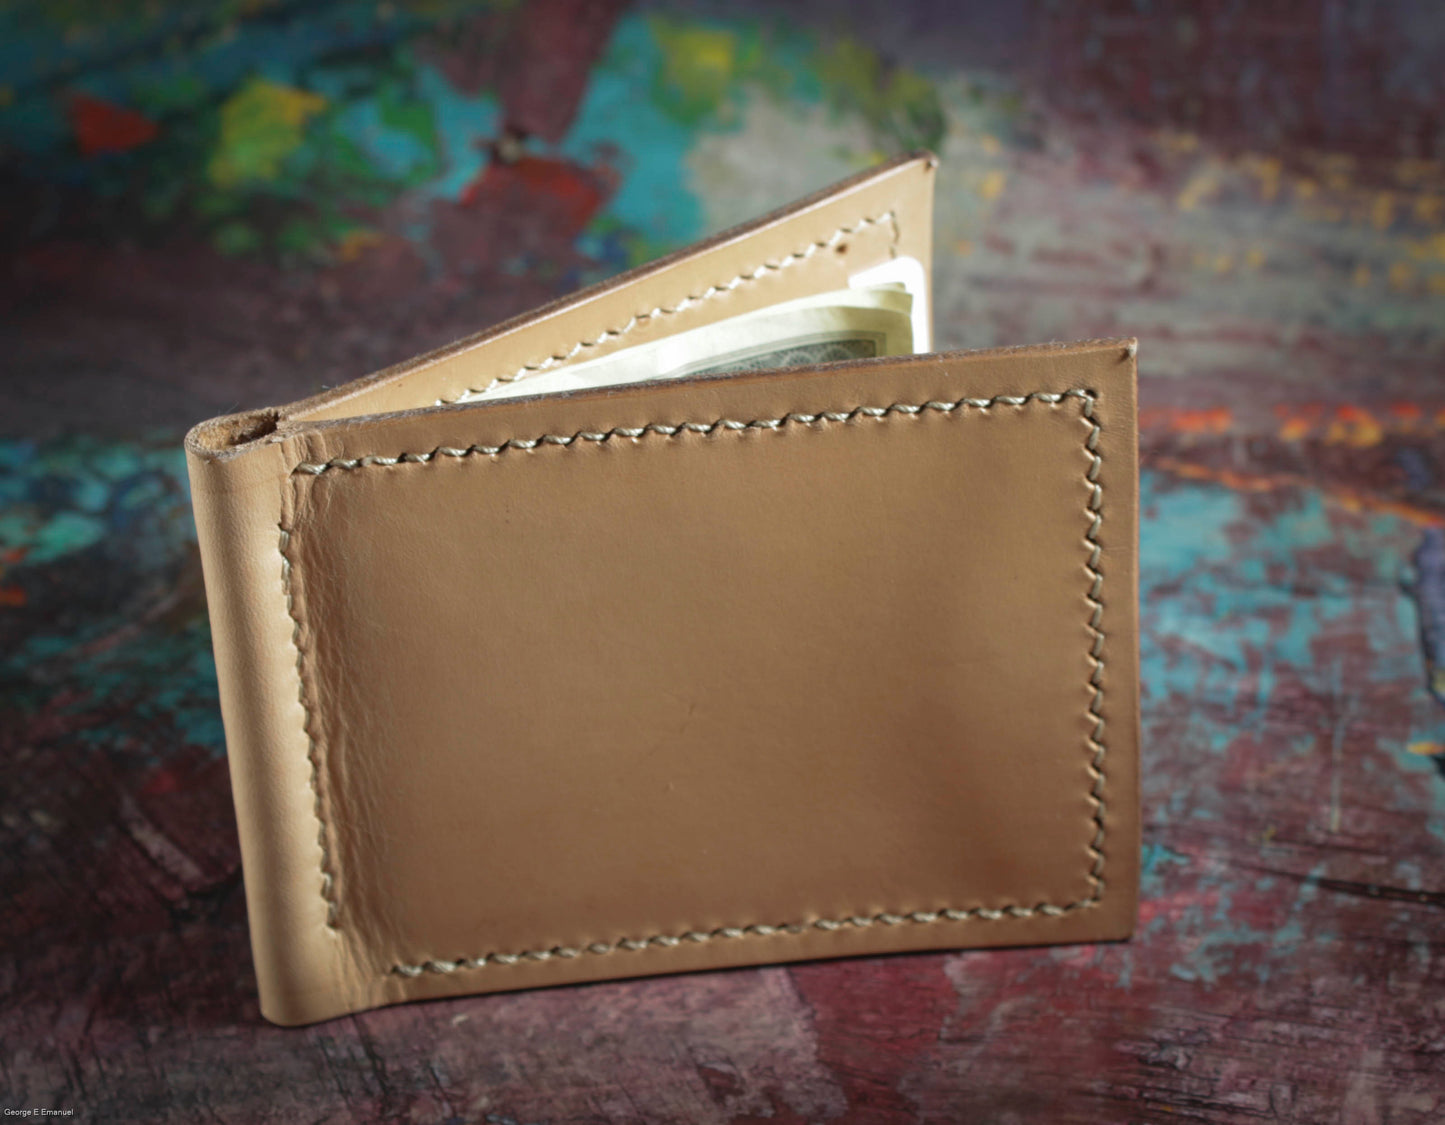 Introducing the Money Clipper and Card Carry Bi-fold Wallet